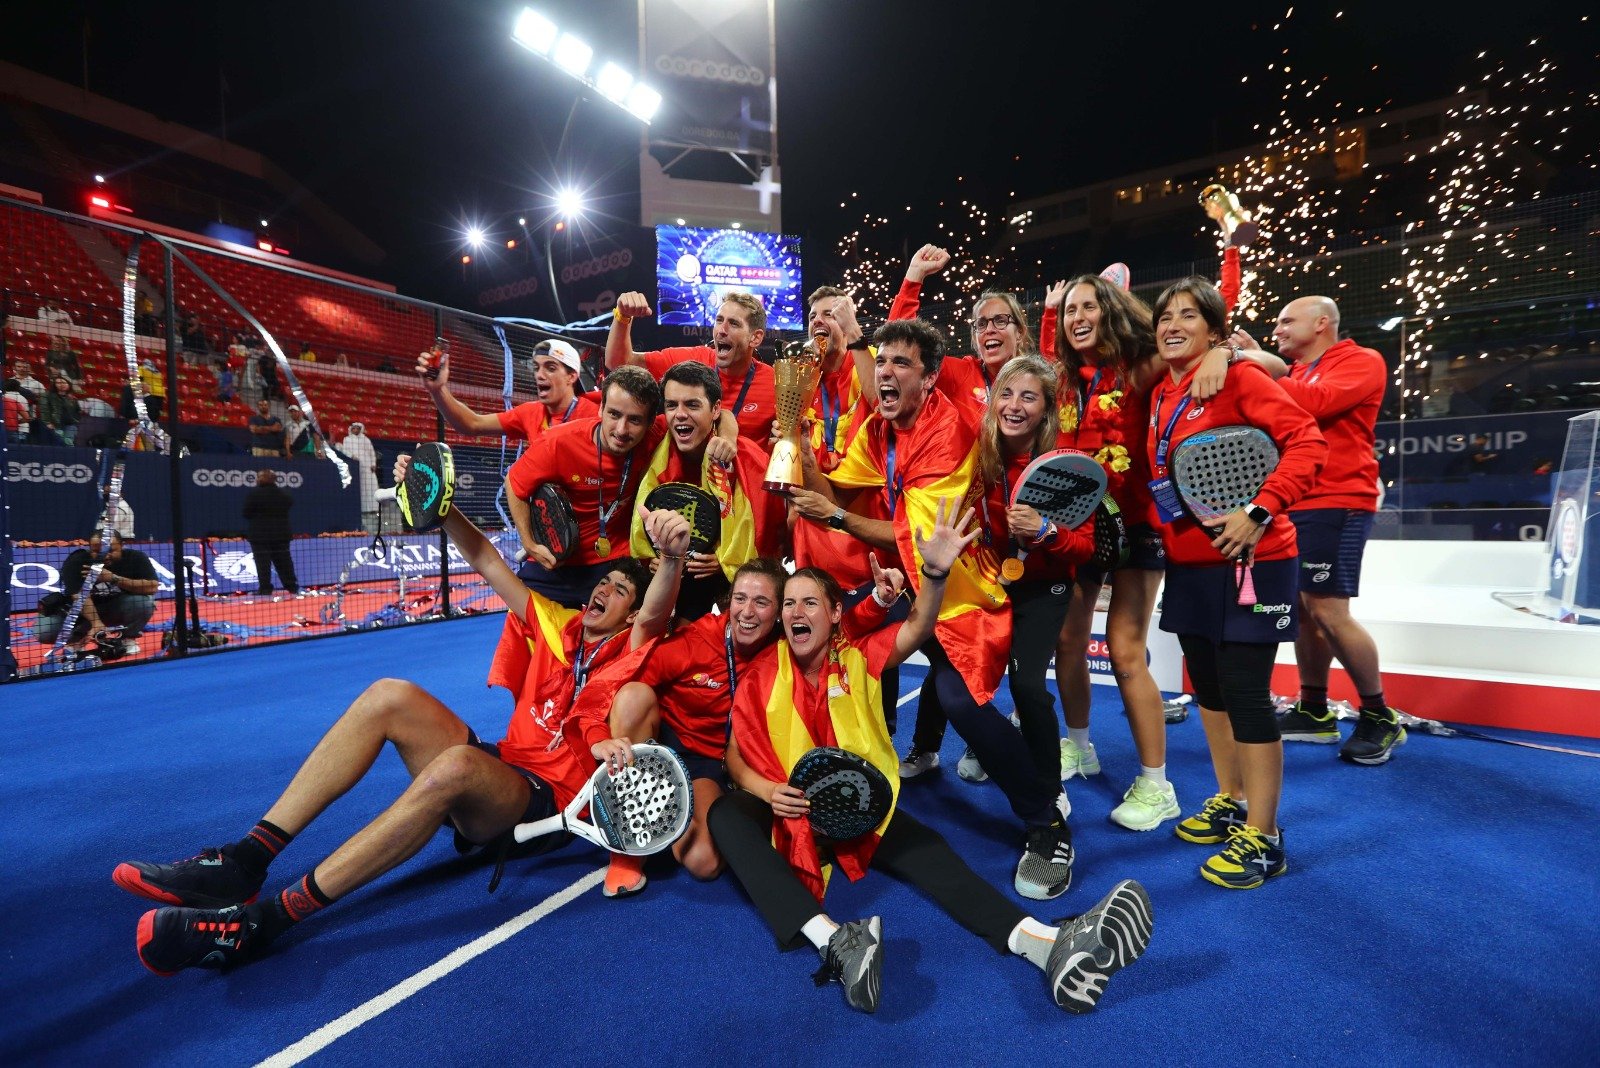 Padel World Championship Qatar 2021 Spain Win Trophy What's Goin On